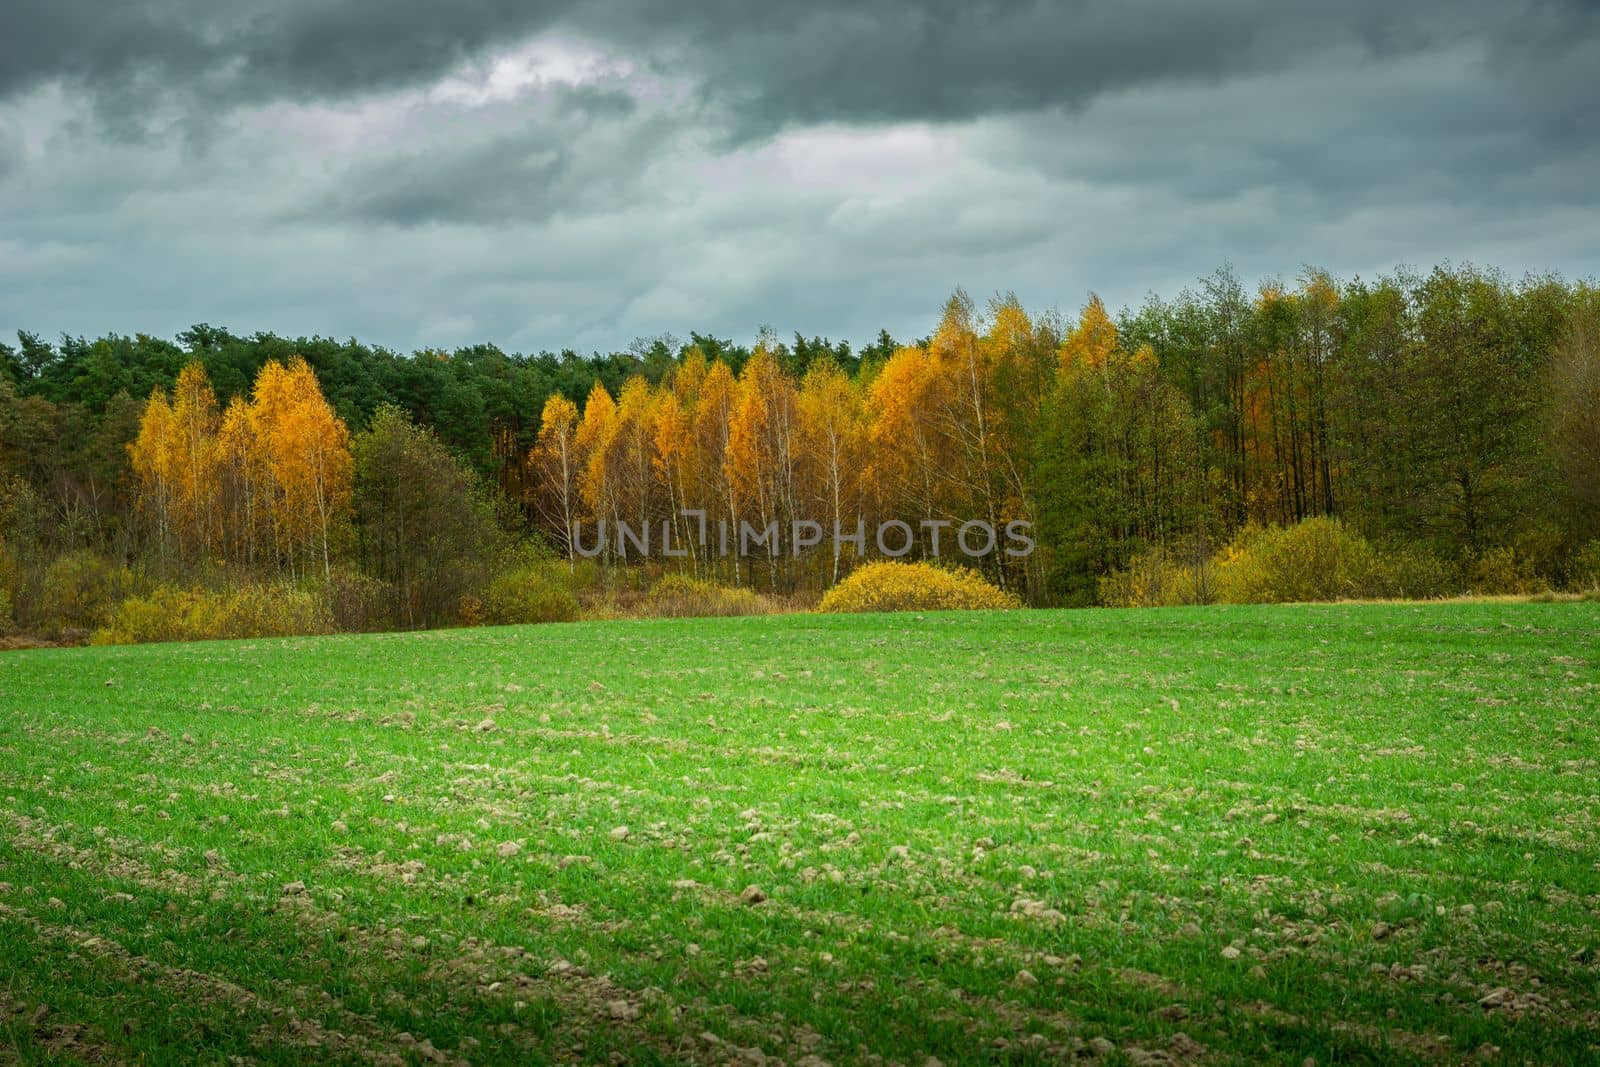 Cloudy sky over the autumn forest and a winter field, October rural landscape